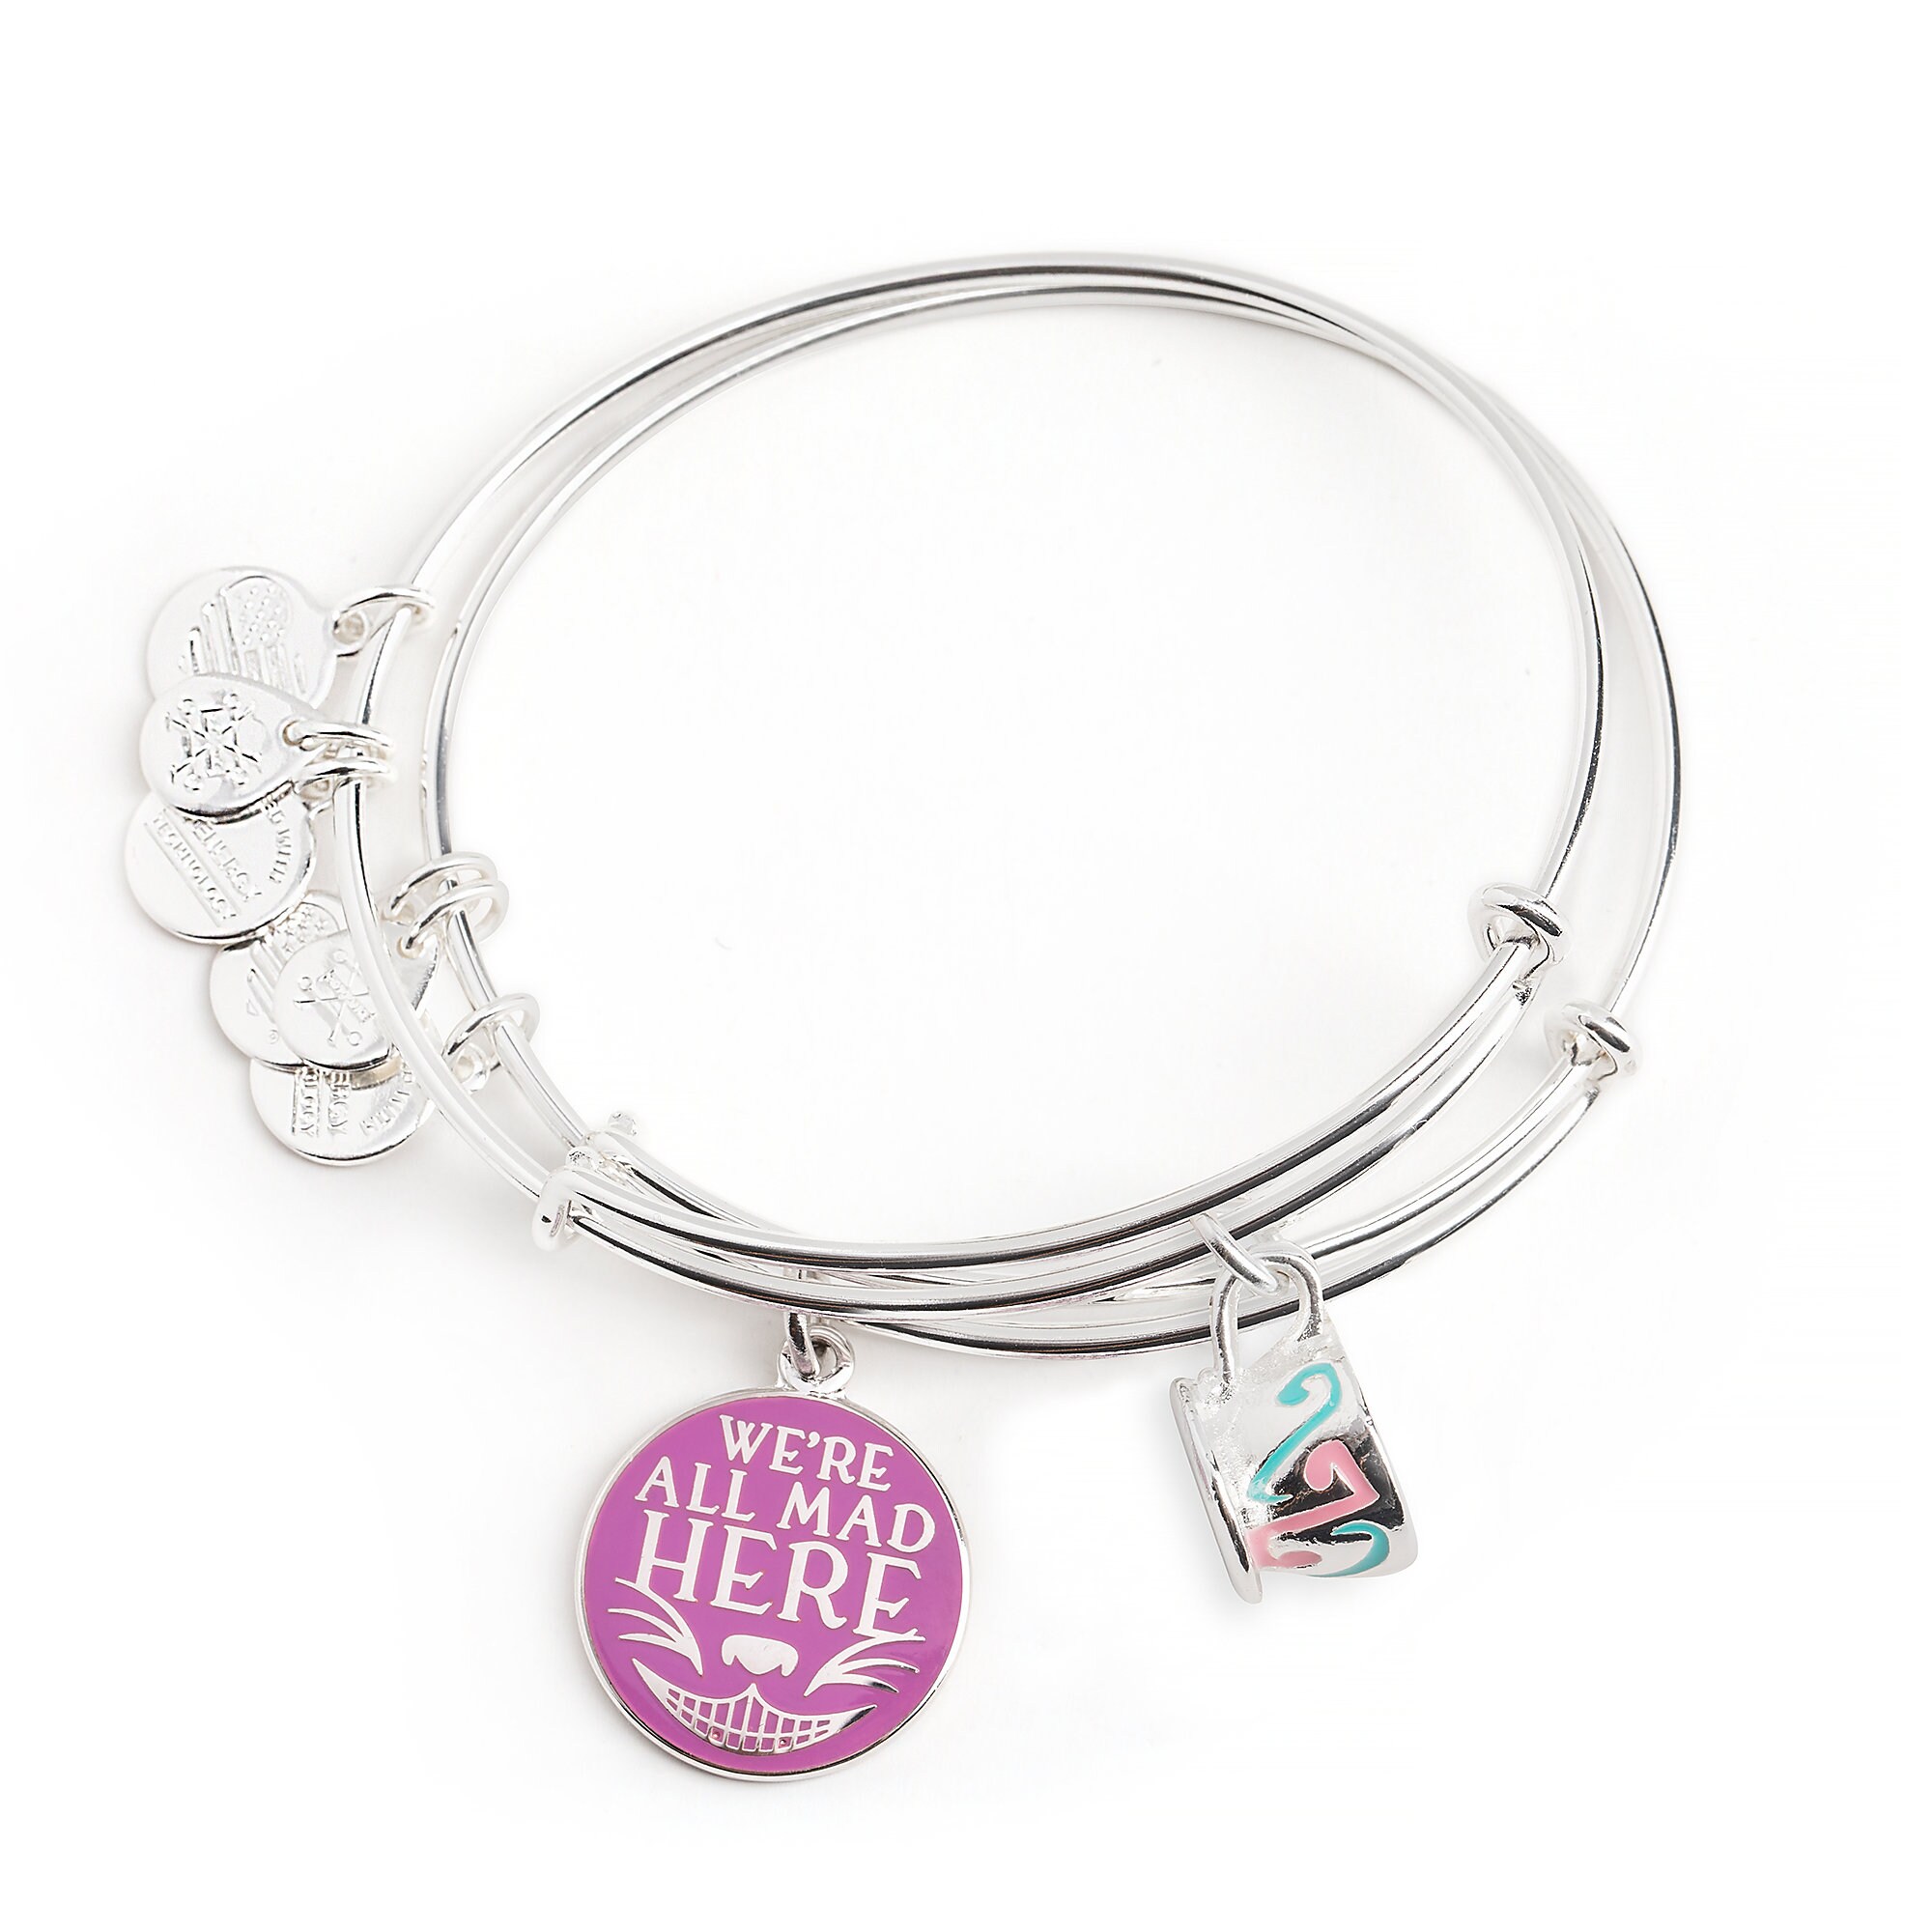 Cheshire Cat Mad Tea Party Bangle Set by Alex and Ani